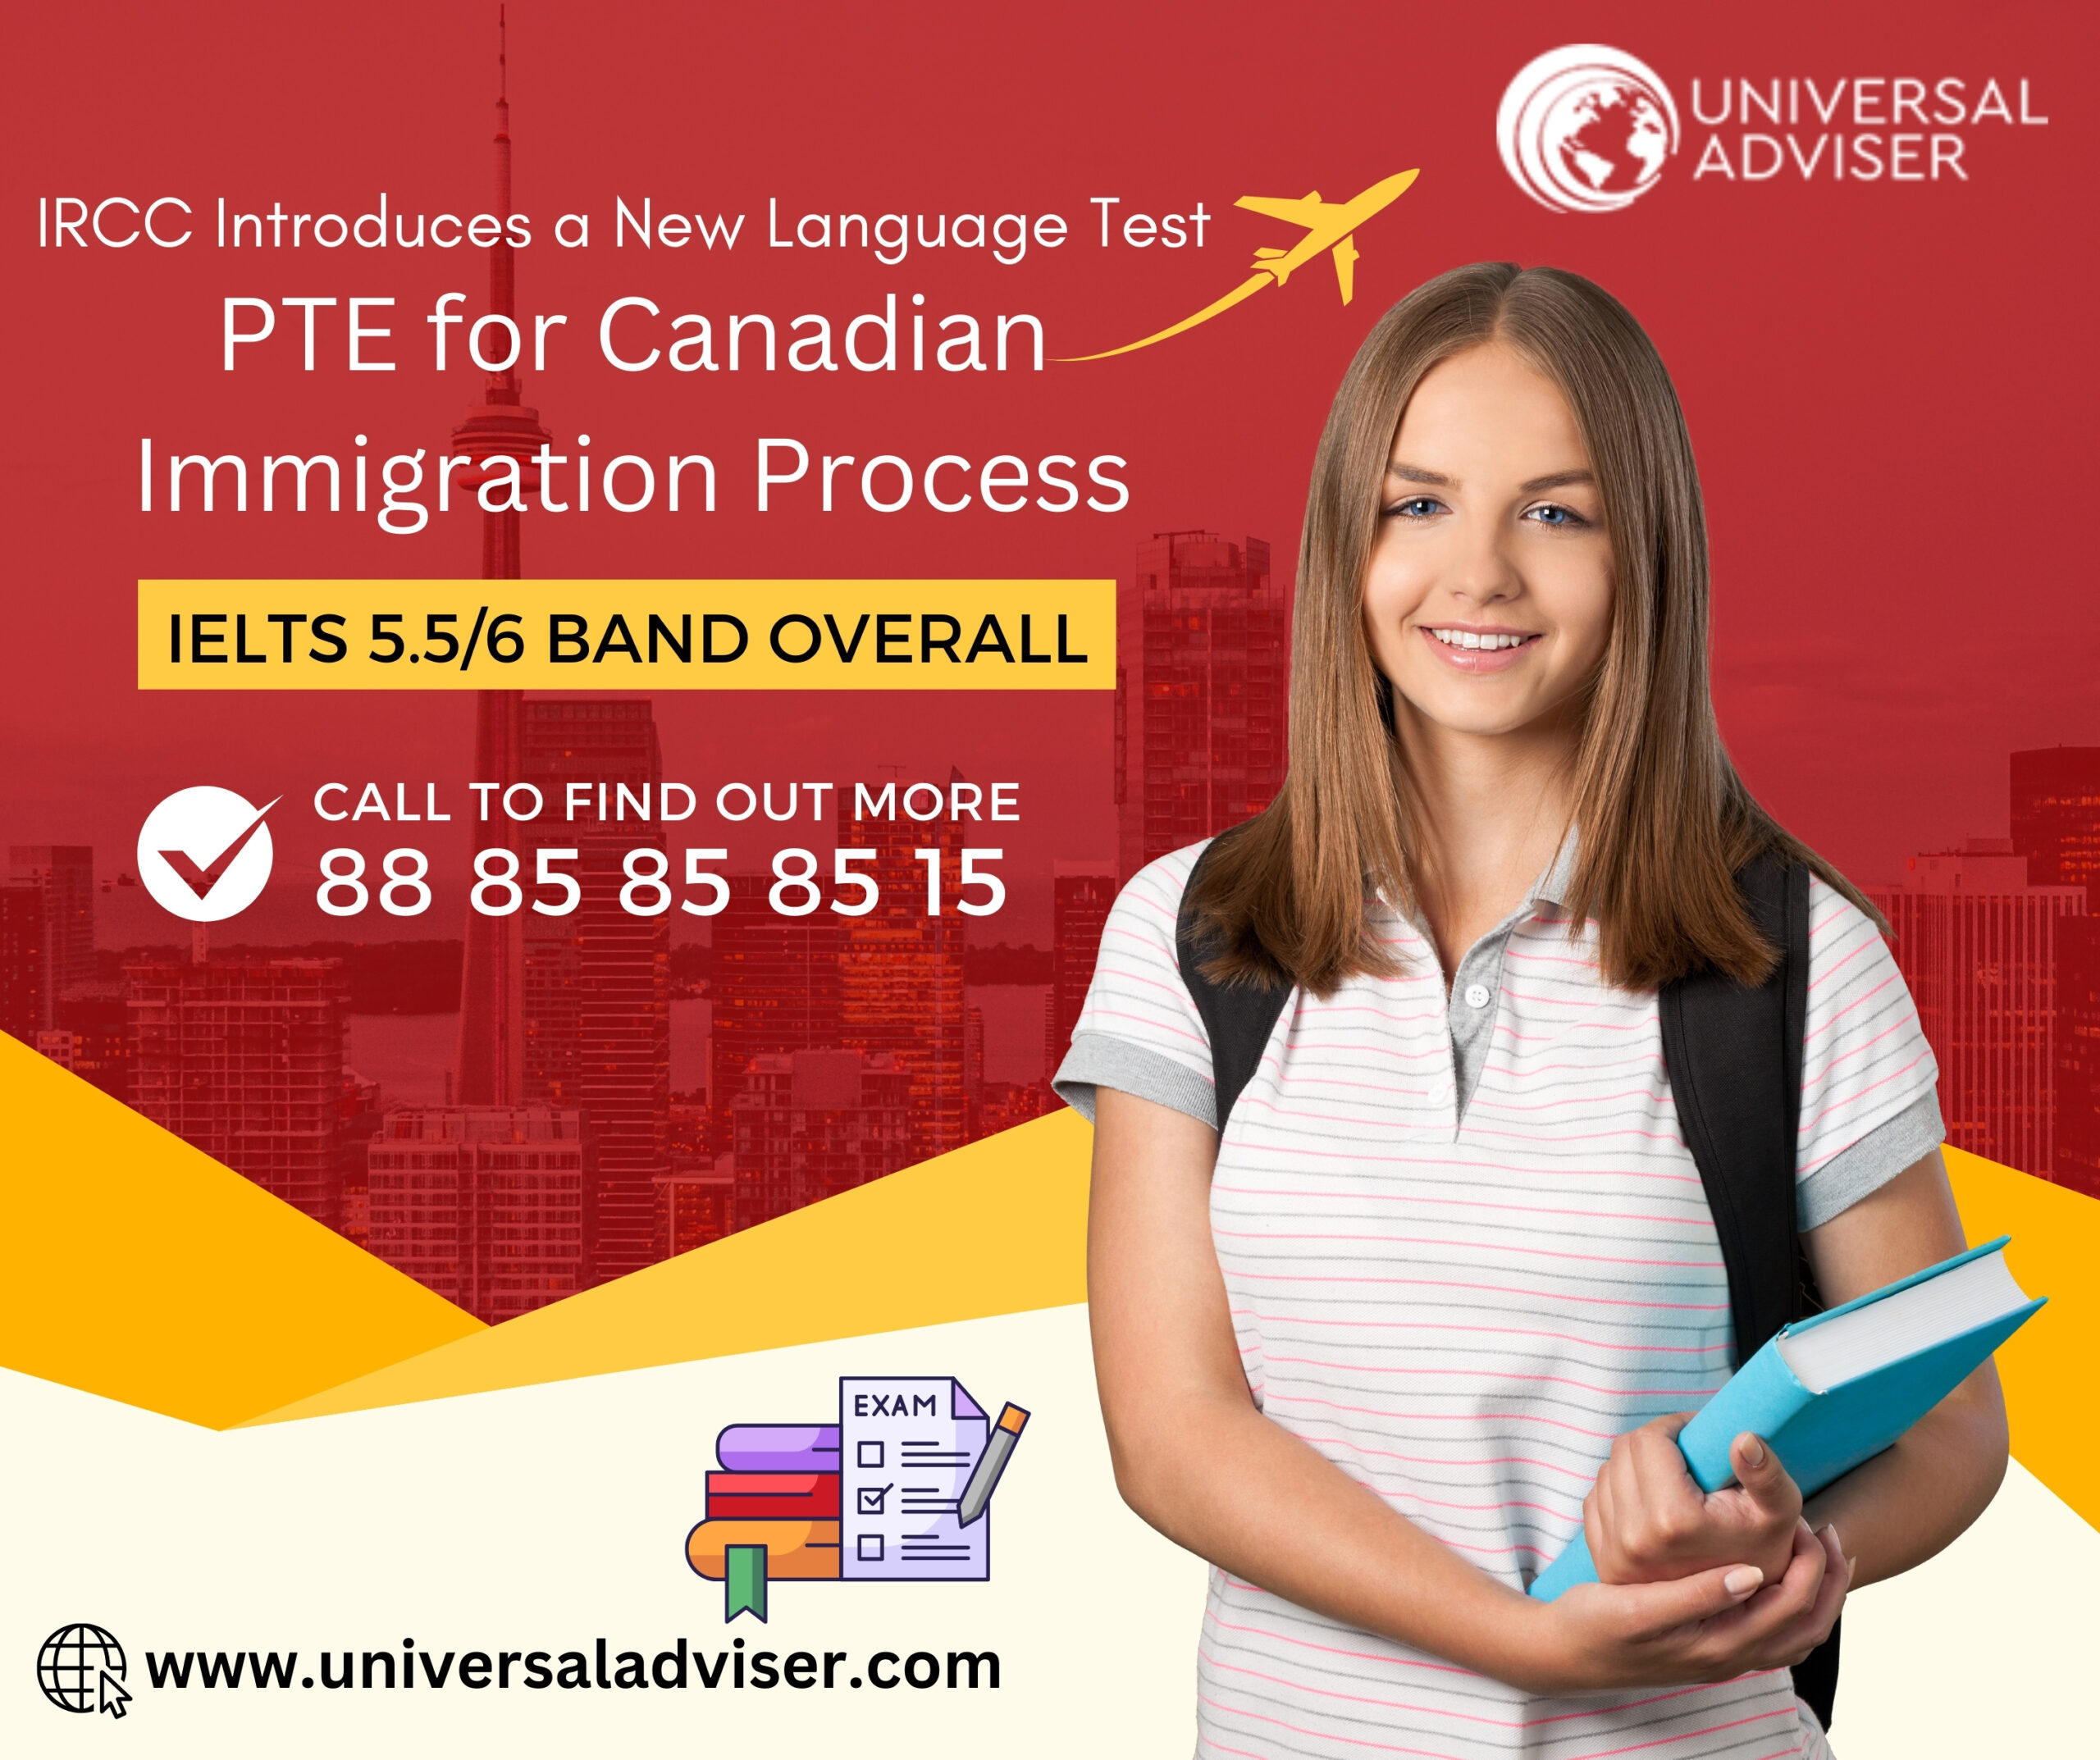 IRCC Introduces a New Language Test- PTE for Canadian Immigration Process